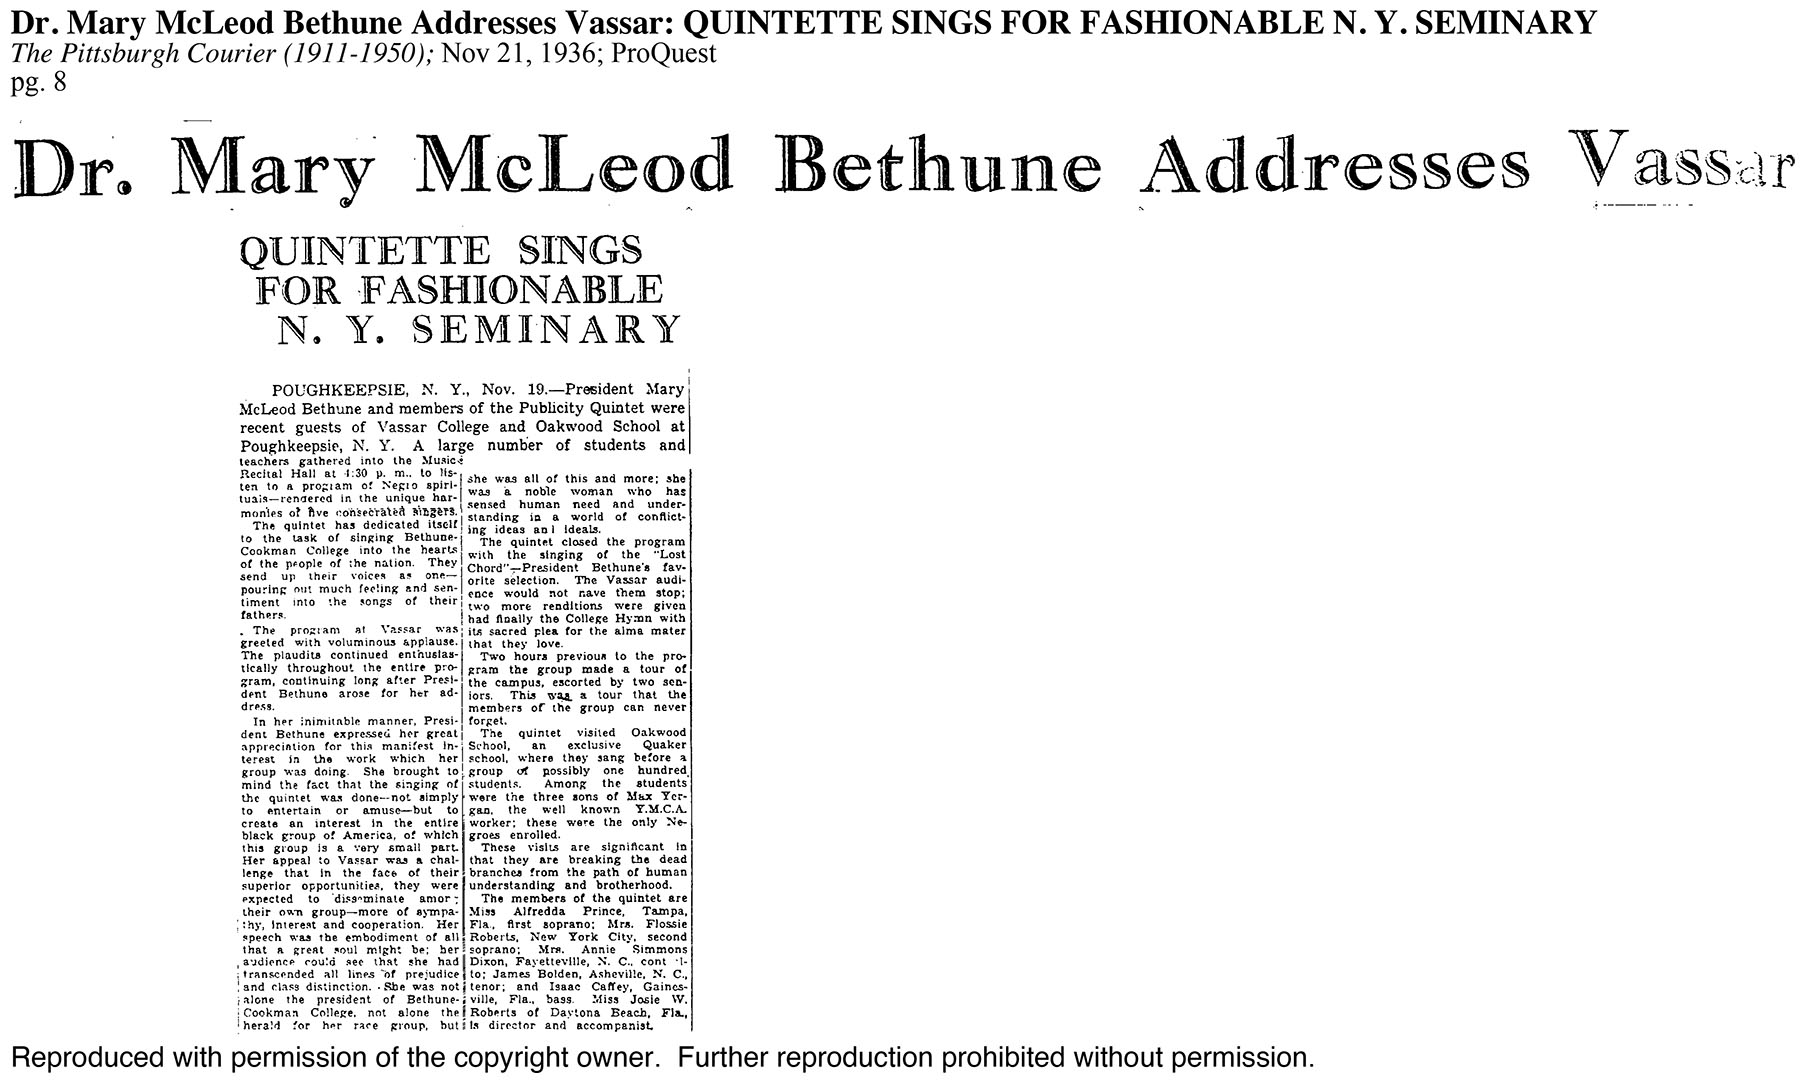 Original article scan for Dr. Mary McLeod Bethune Addresses Vassar: Quintette Sings for Fashionable N.Y. Seminary; The Pittsburgh Courier (1911-1950); Nov 21, 1936; ProQuest pg. 8